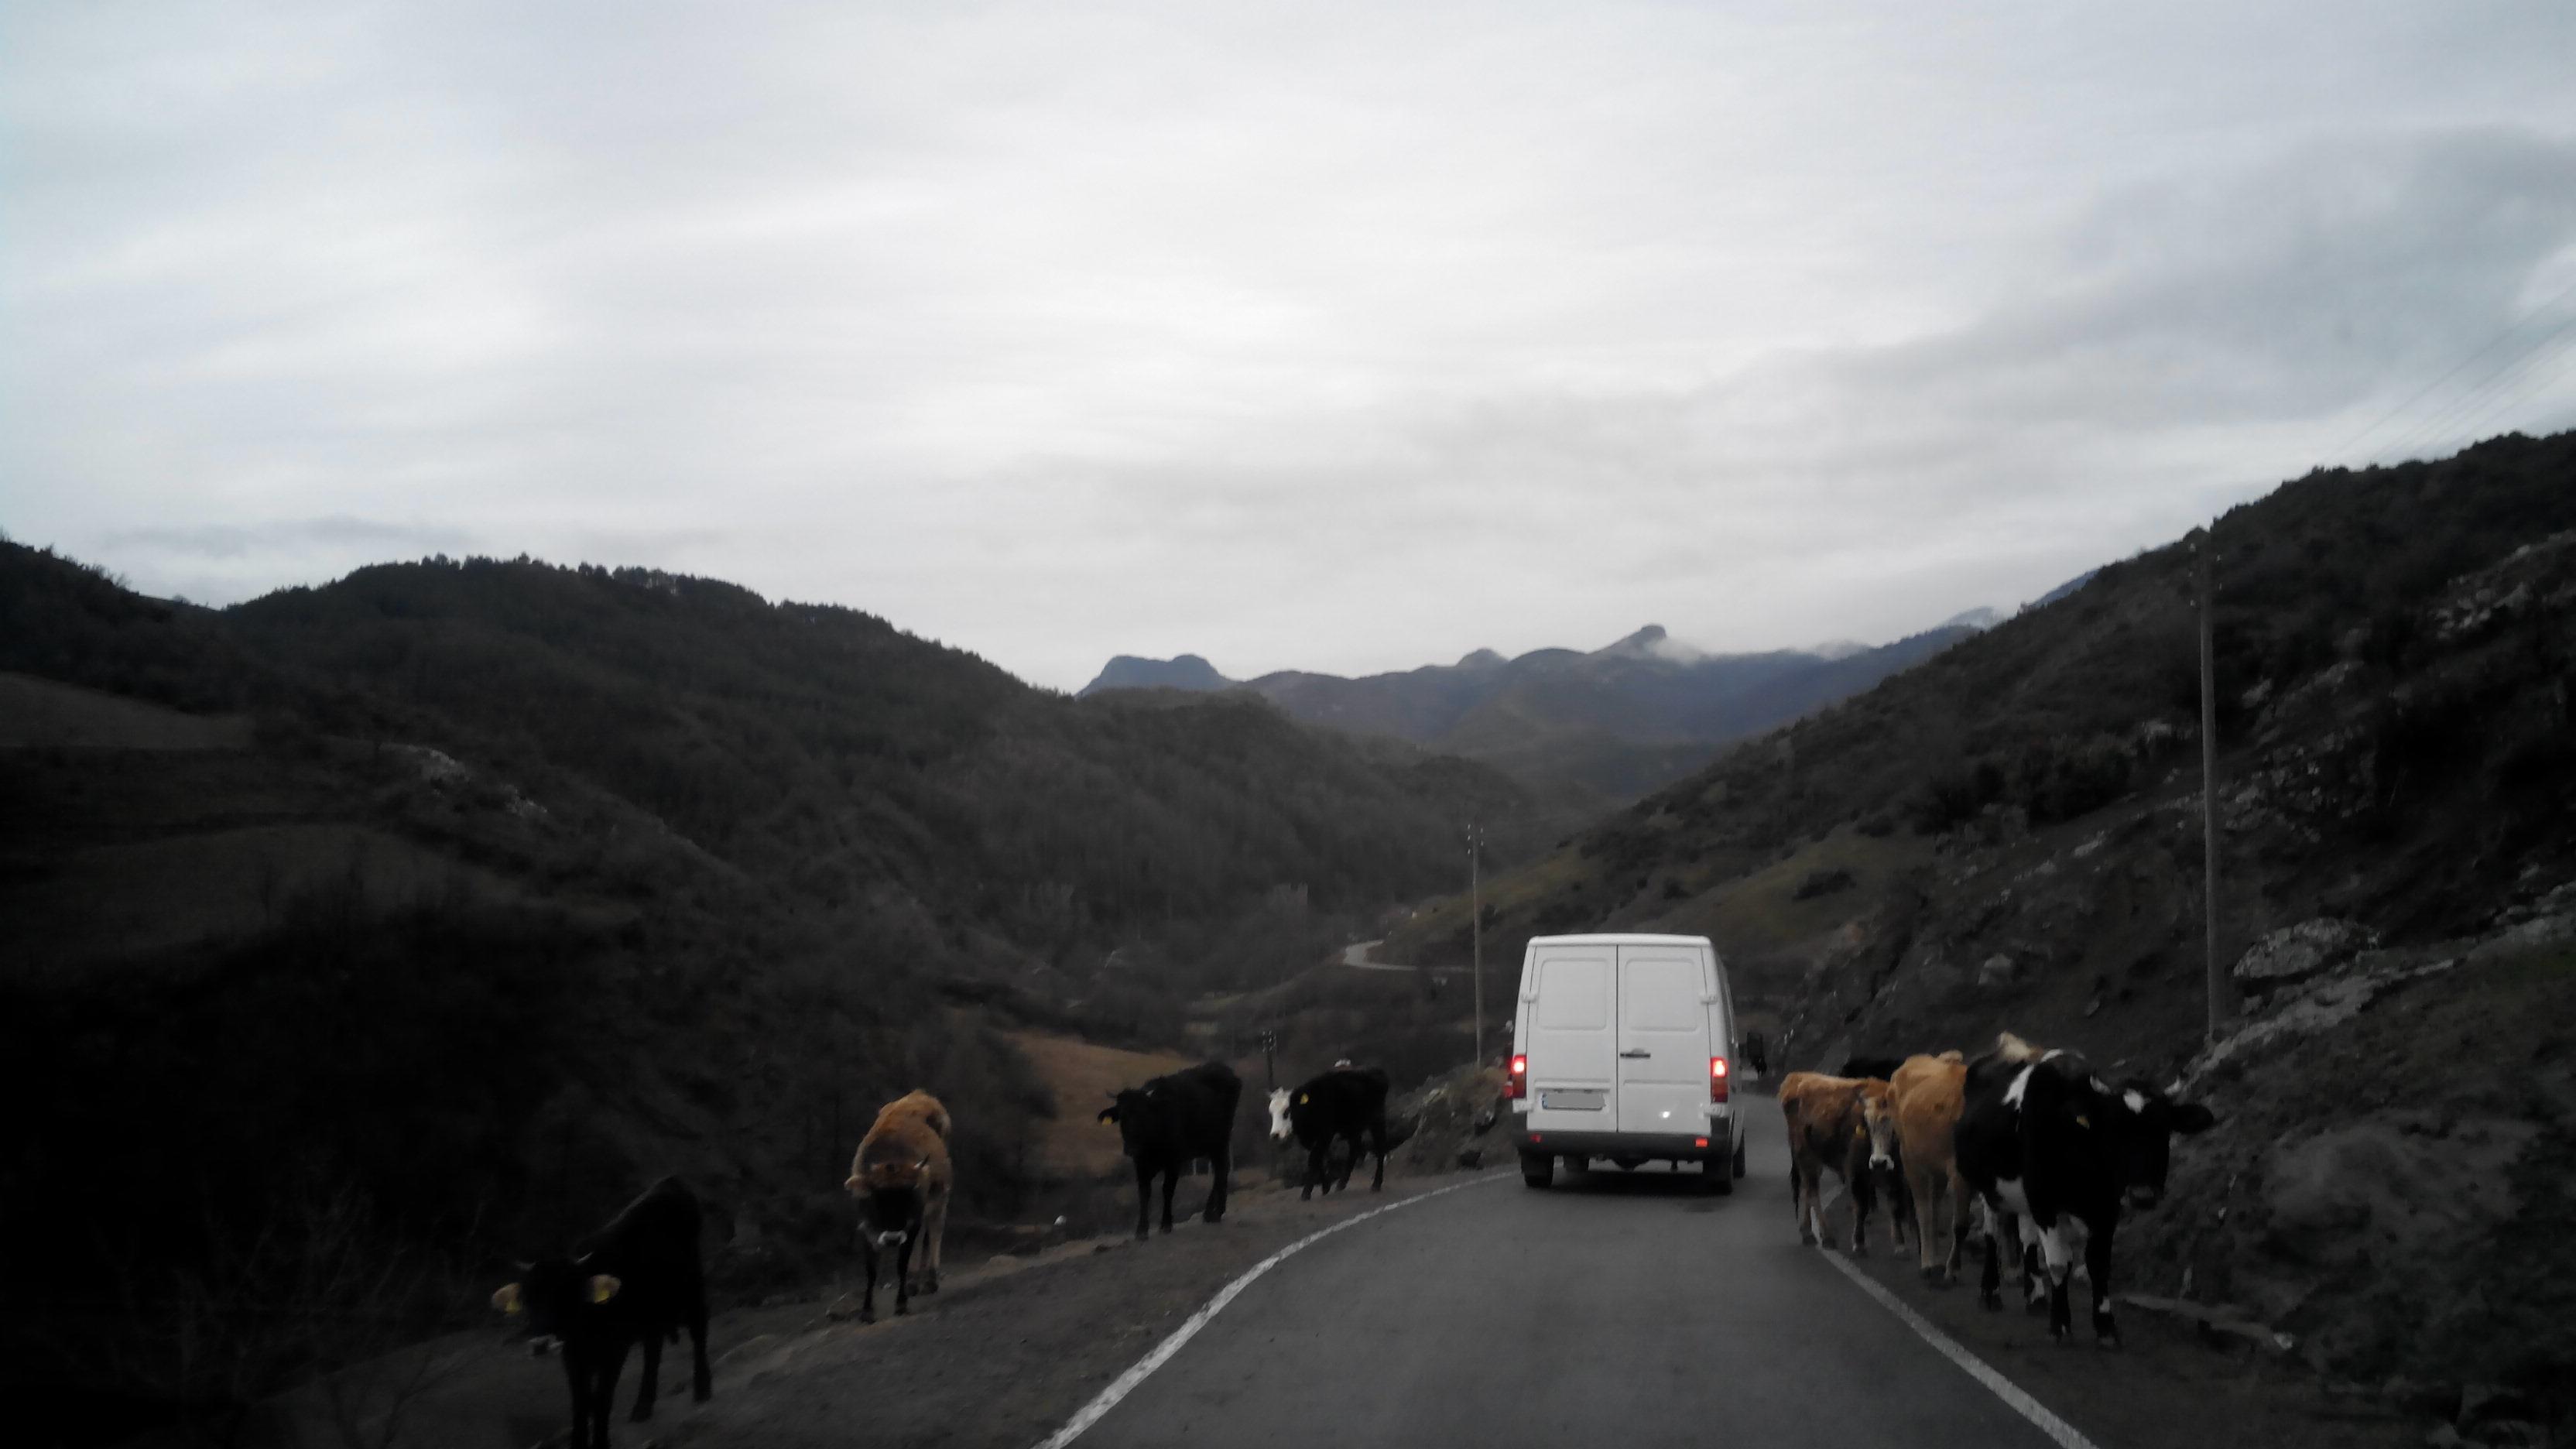 A white van on a road in the mountains surrounded by cows